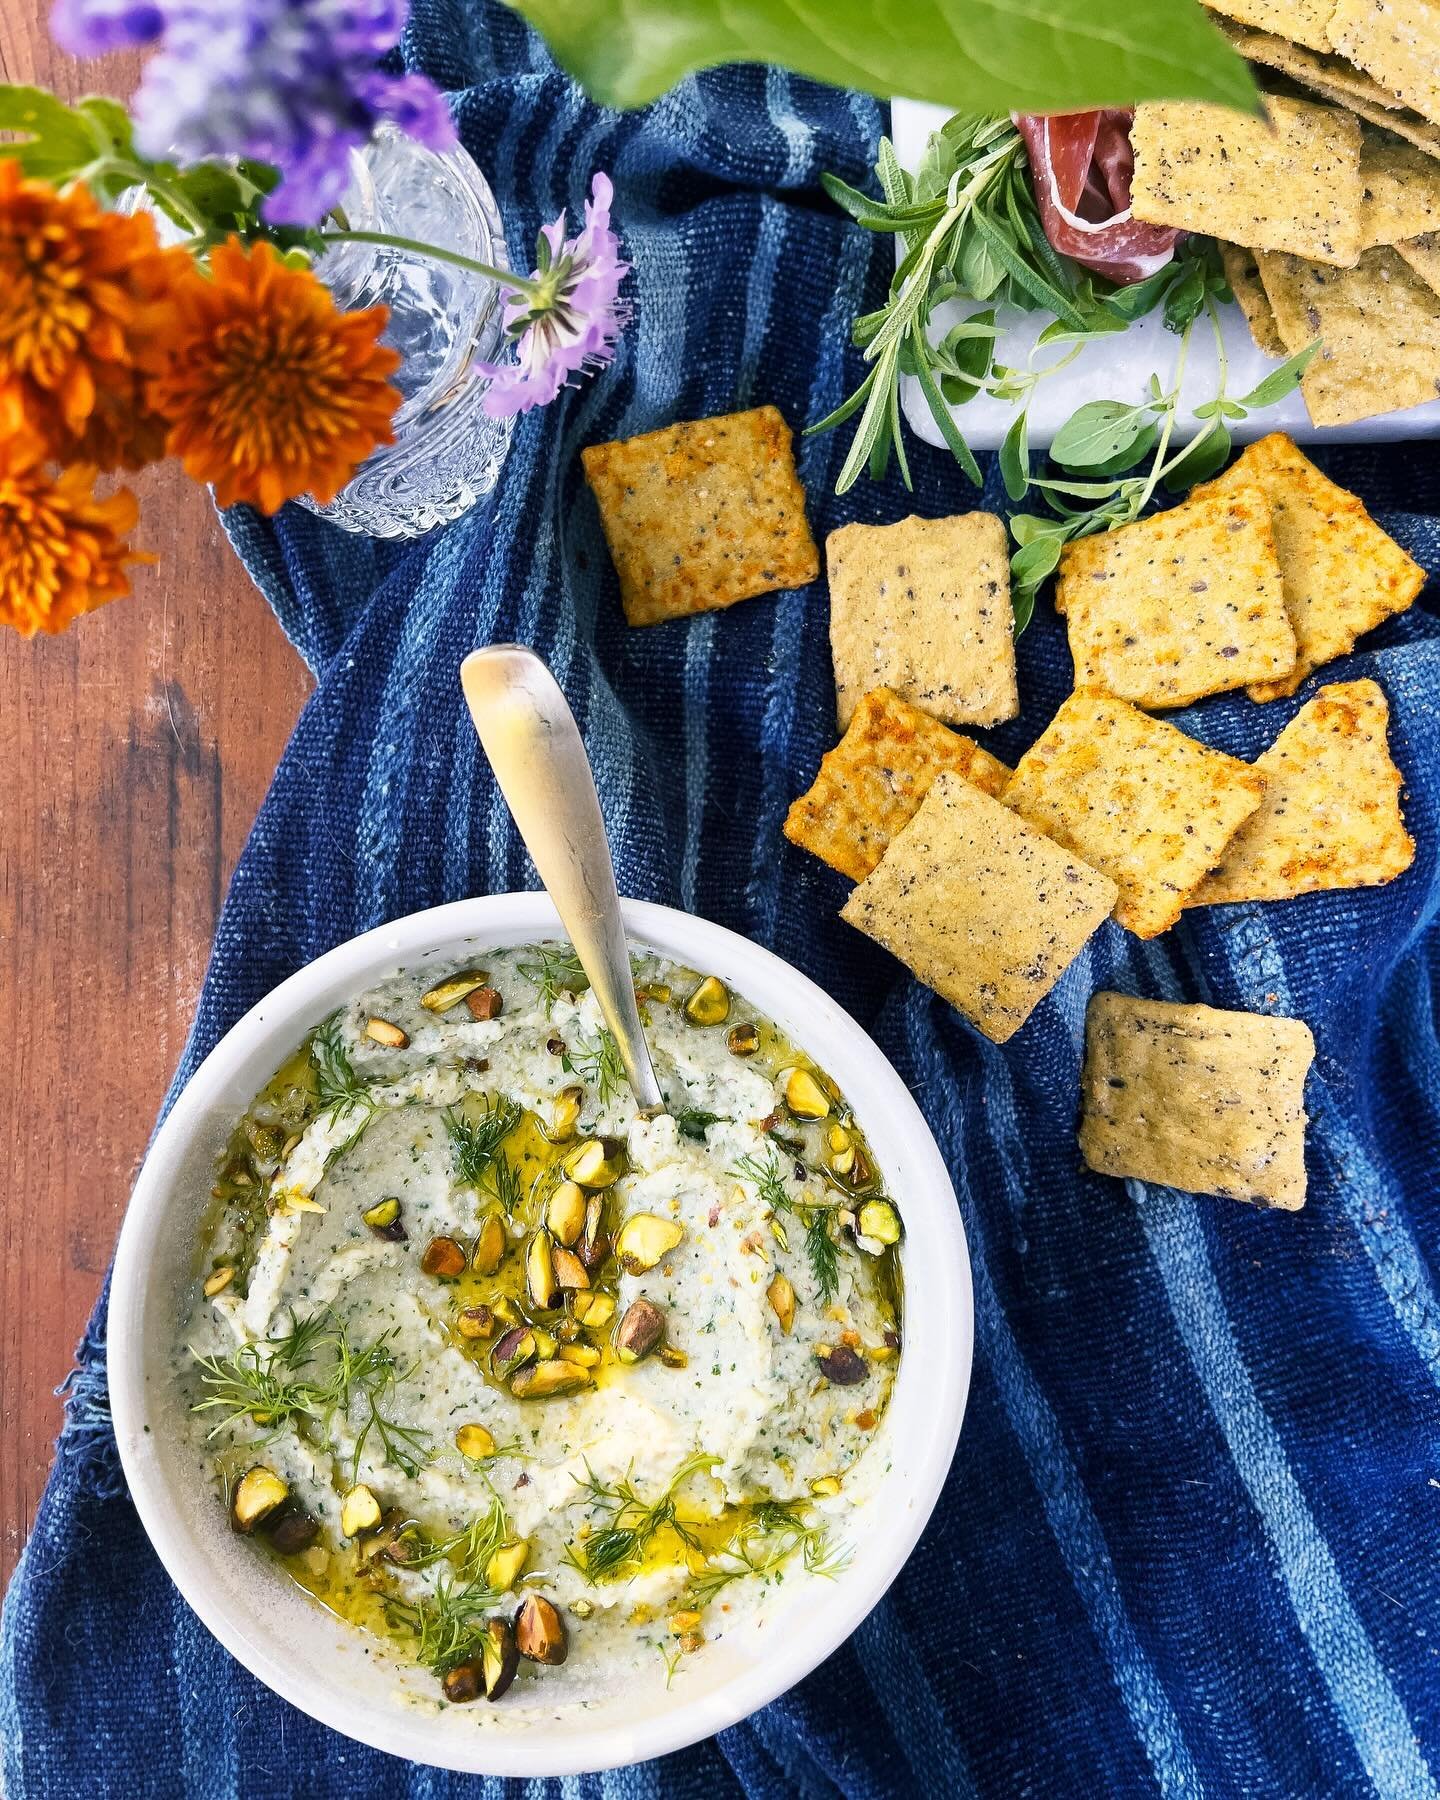 Warmer days call for a springy spread #ad. On that note, I made this smokey eggplant dip, whipped feta hummus, &amp; bright walnut romesco dip to pair with @crunchmastercrackers perfectly crisp new Avocado Toast. These vegan, always gluten-free beaut